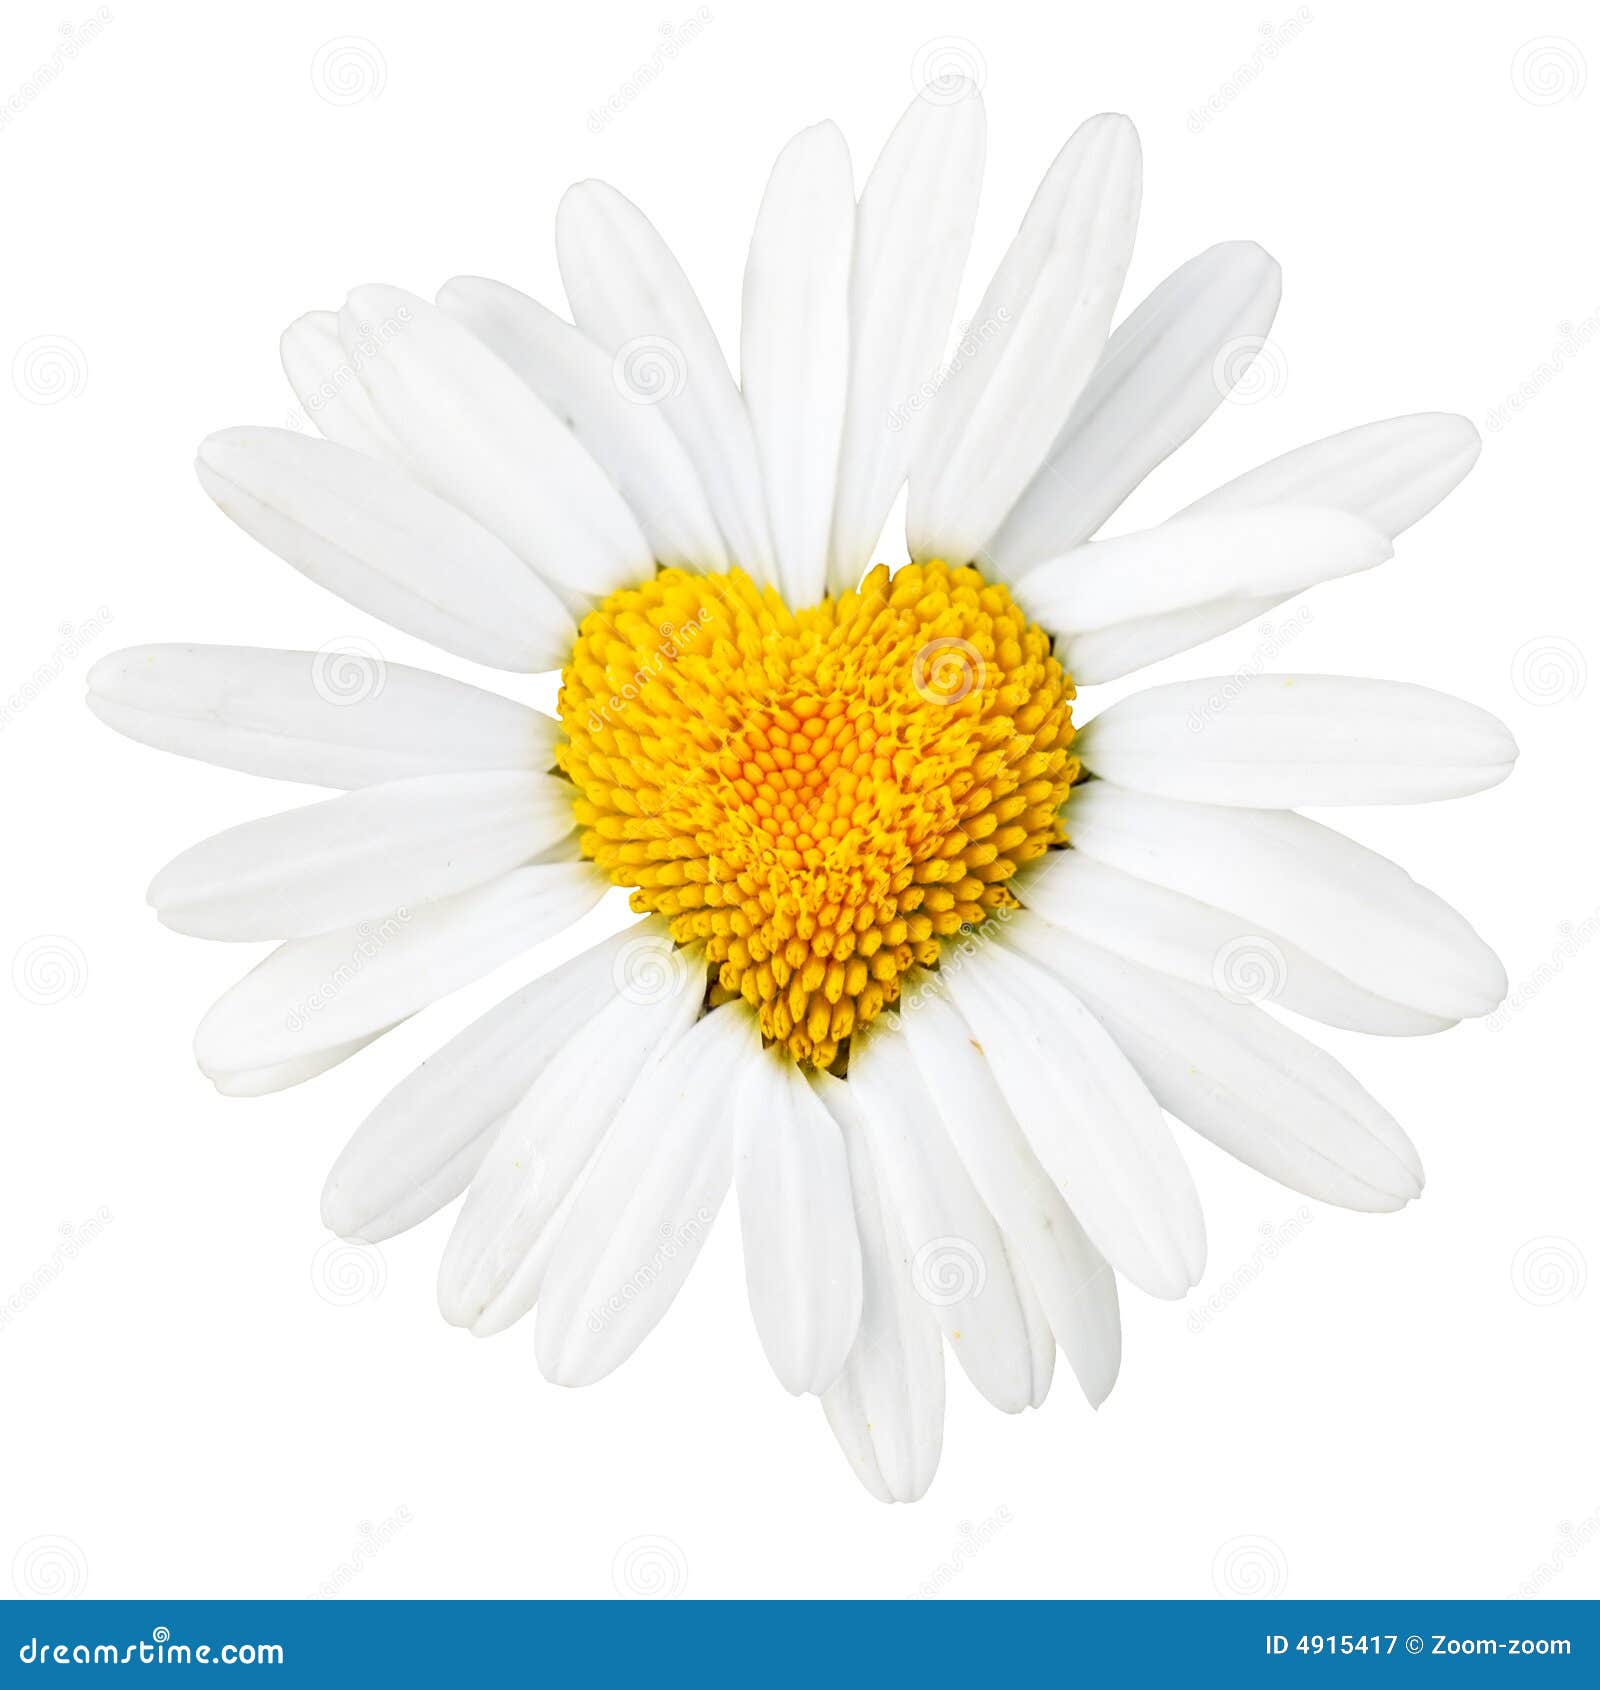 daisy with heart in center